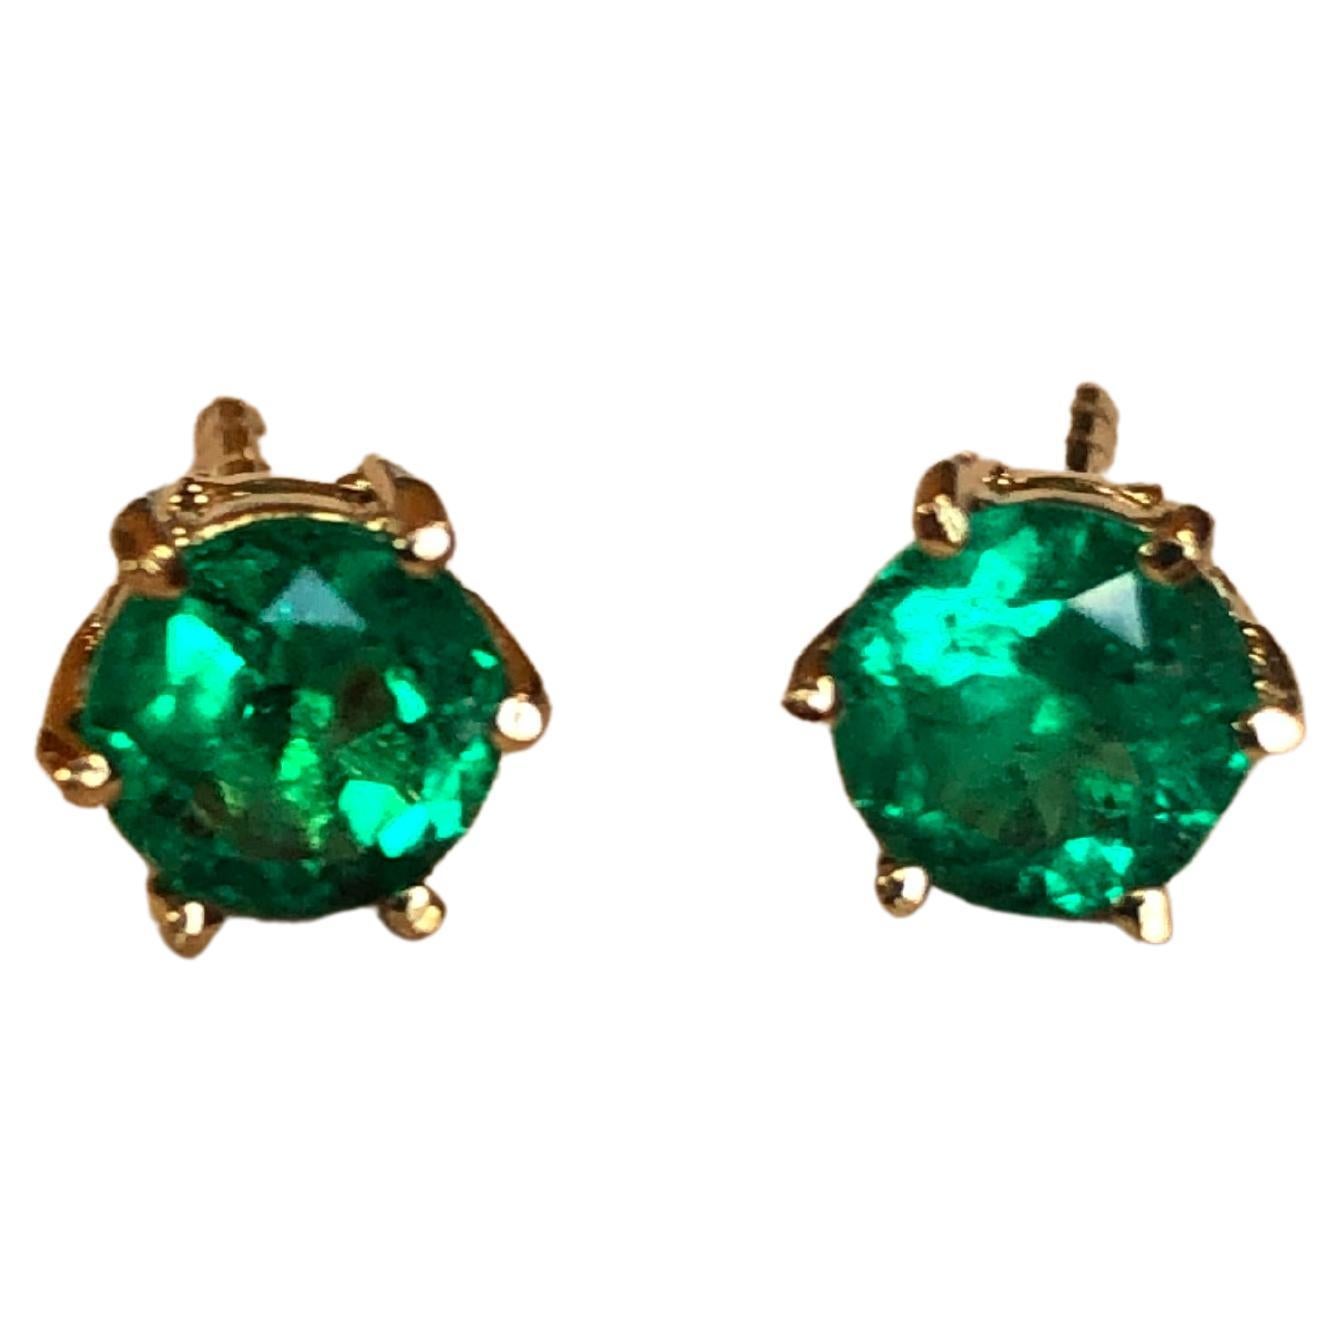 A beautiful fine pair of round-cut AAA natural emerald stud earrings set in 18k yellow gold.  Each earring solely features a sparkly green-colored round cut natural Colombian emerald, which is a 6-prong set open back setting.  The earrings measure